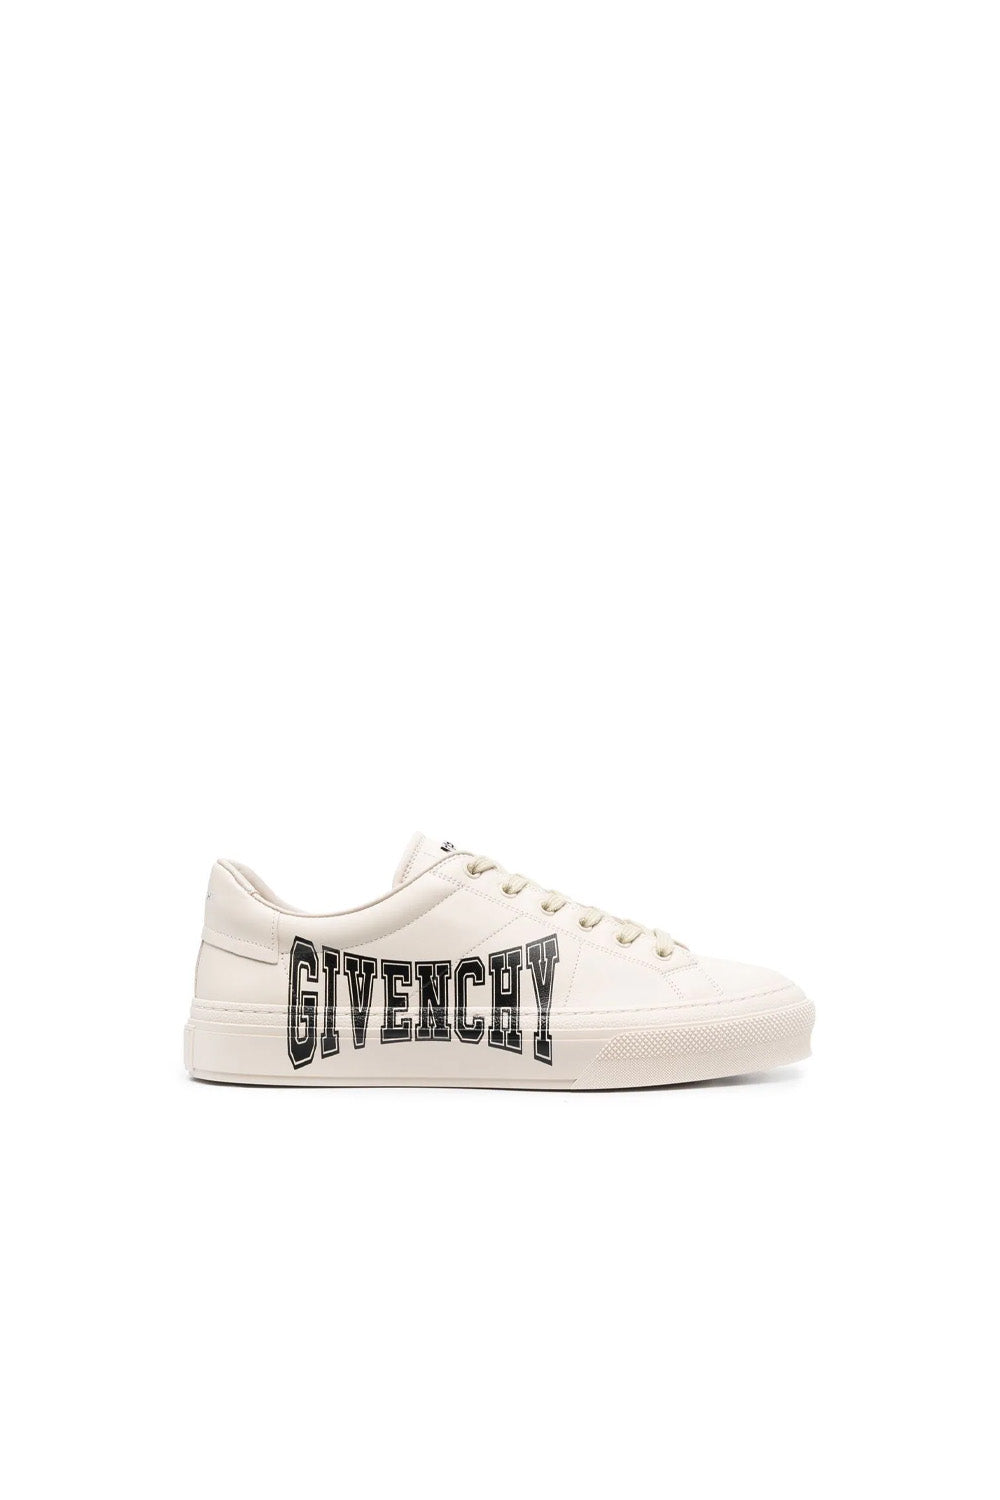 GIVENCHY logo-print lace-up sneakers